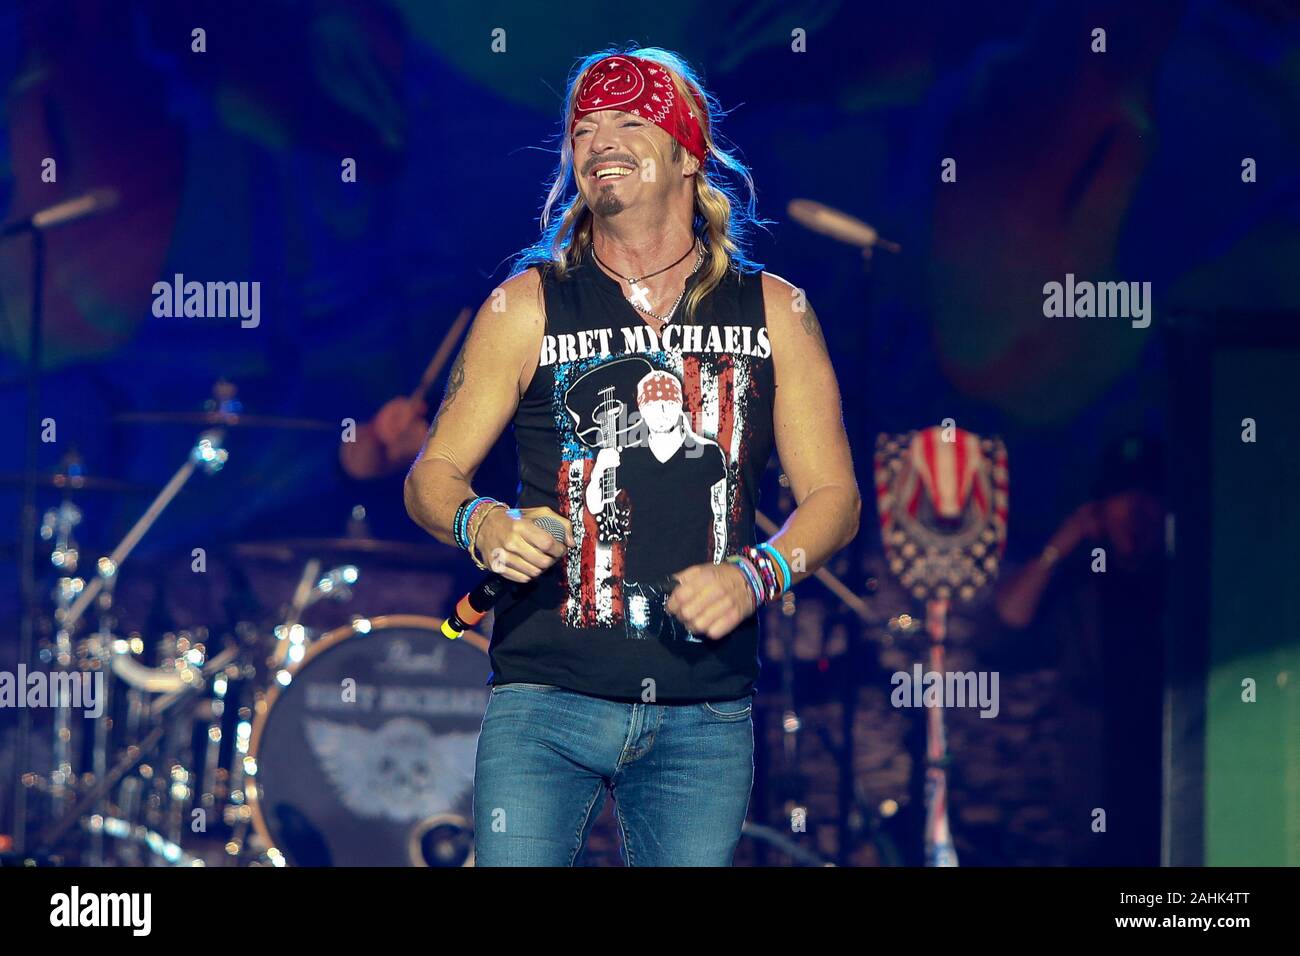 HUNTINGTON, NY - DEC 28: Bret Michaels performs in concert at the Paramount on December 28, 2019 in Huntington, New York. Stock Photo